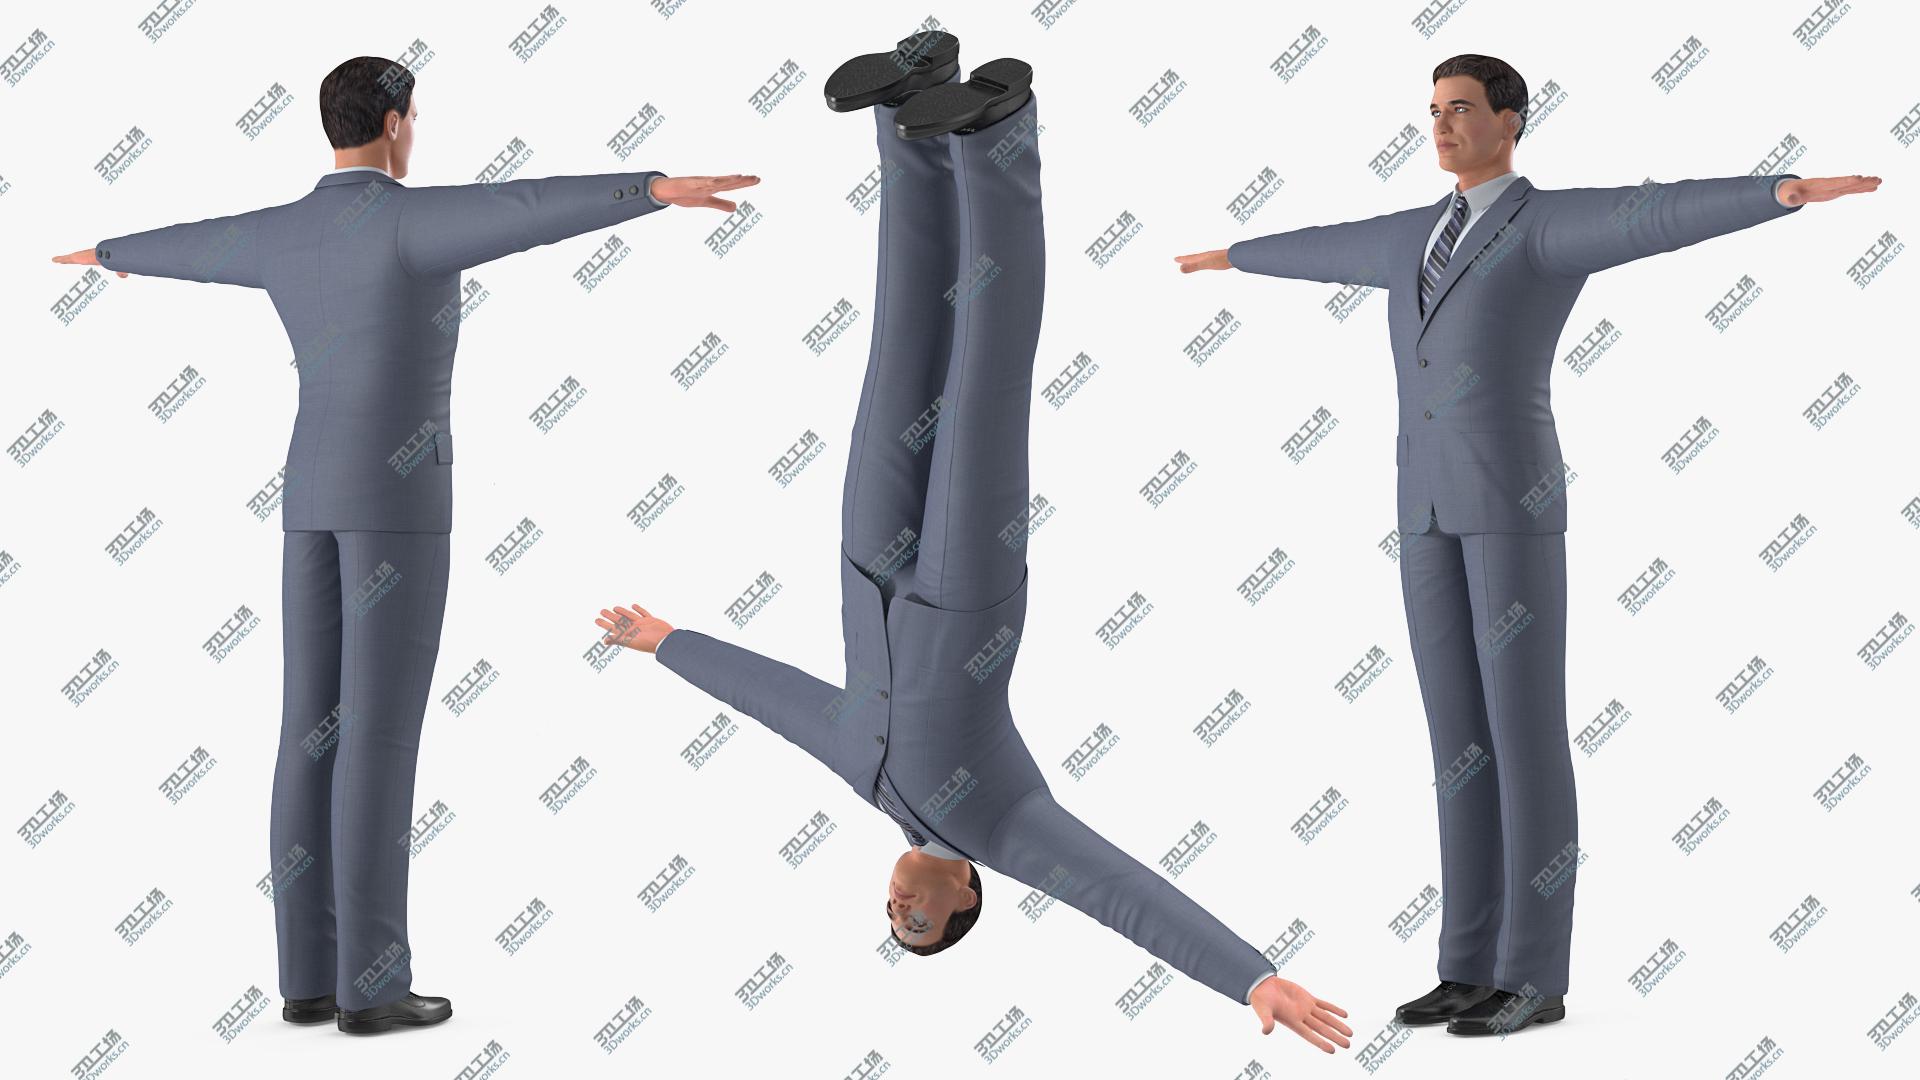 images/goods_img/20210313/3D Man in Business Suit T-Pose/5.jpg